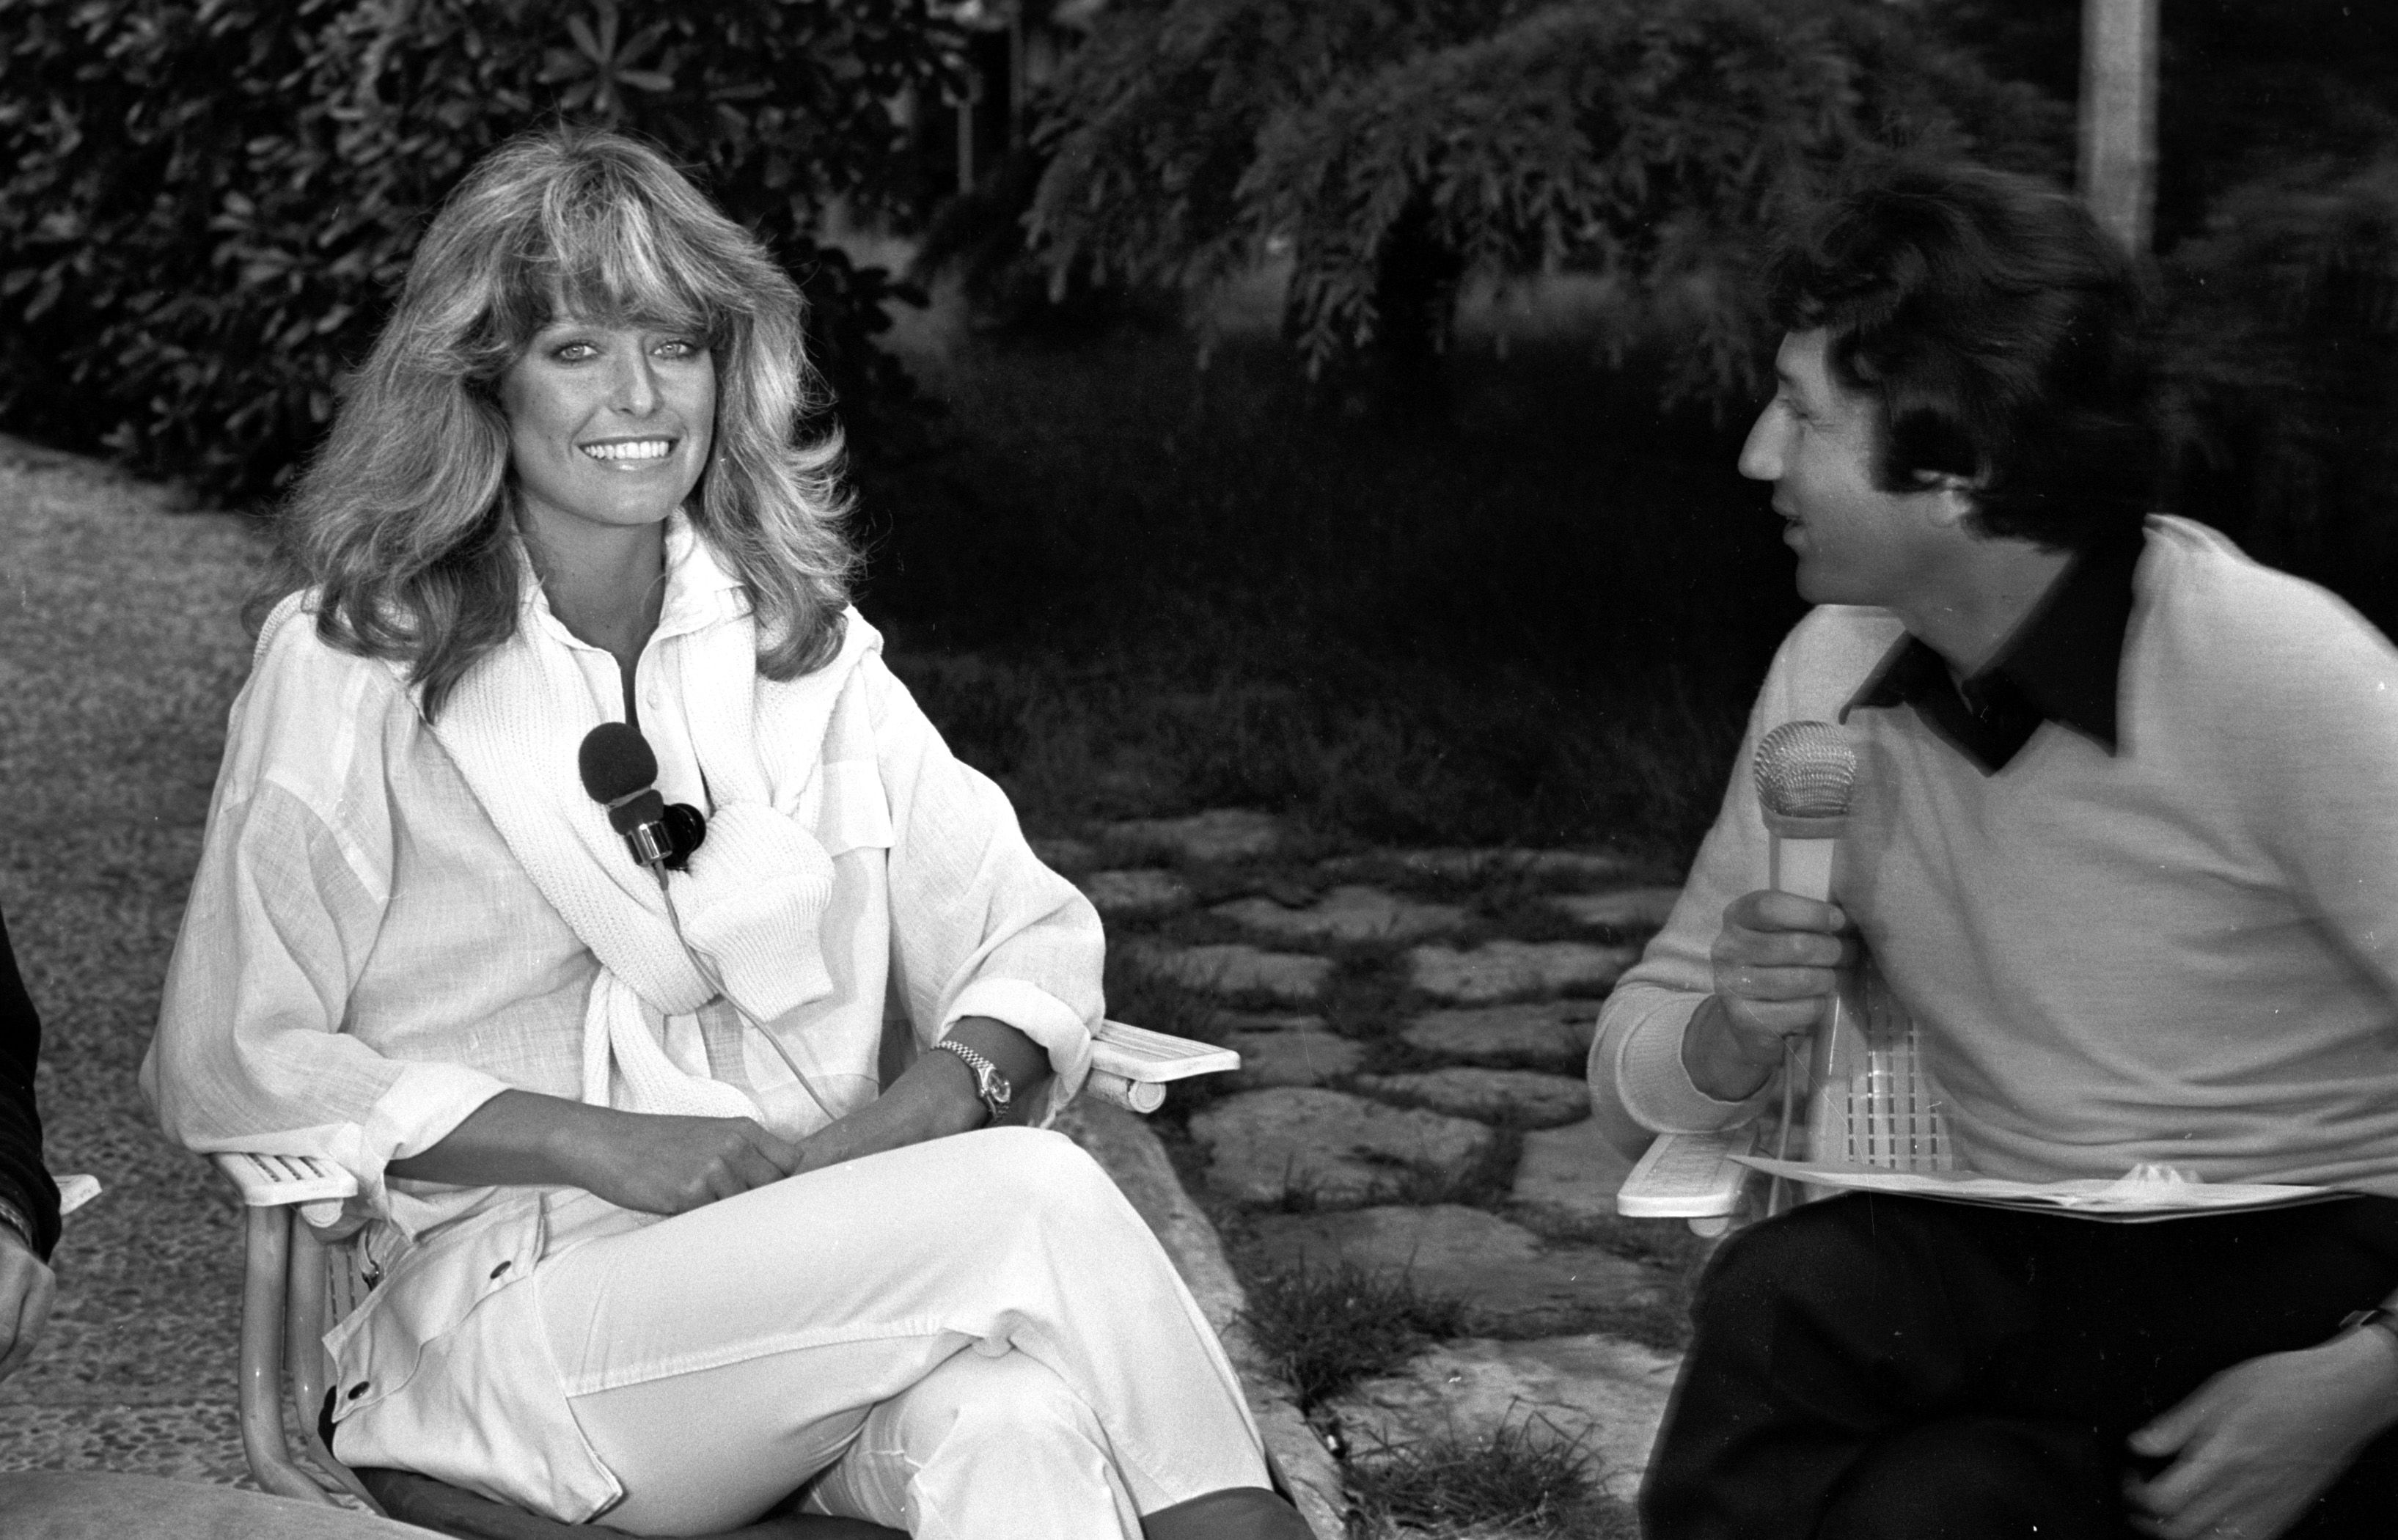 Anal First Her Farrah Fawcett - The story behind 'Charlie's Angels' star Farrah Fawcett's steamy red  swimsuit poster that made her an icon - Good Morning America